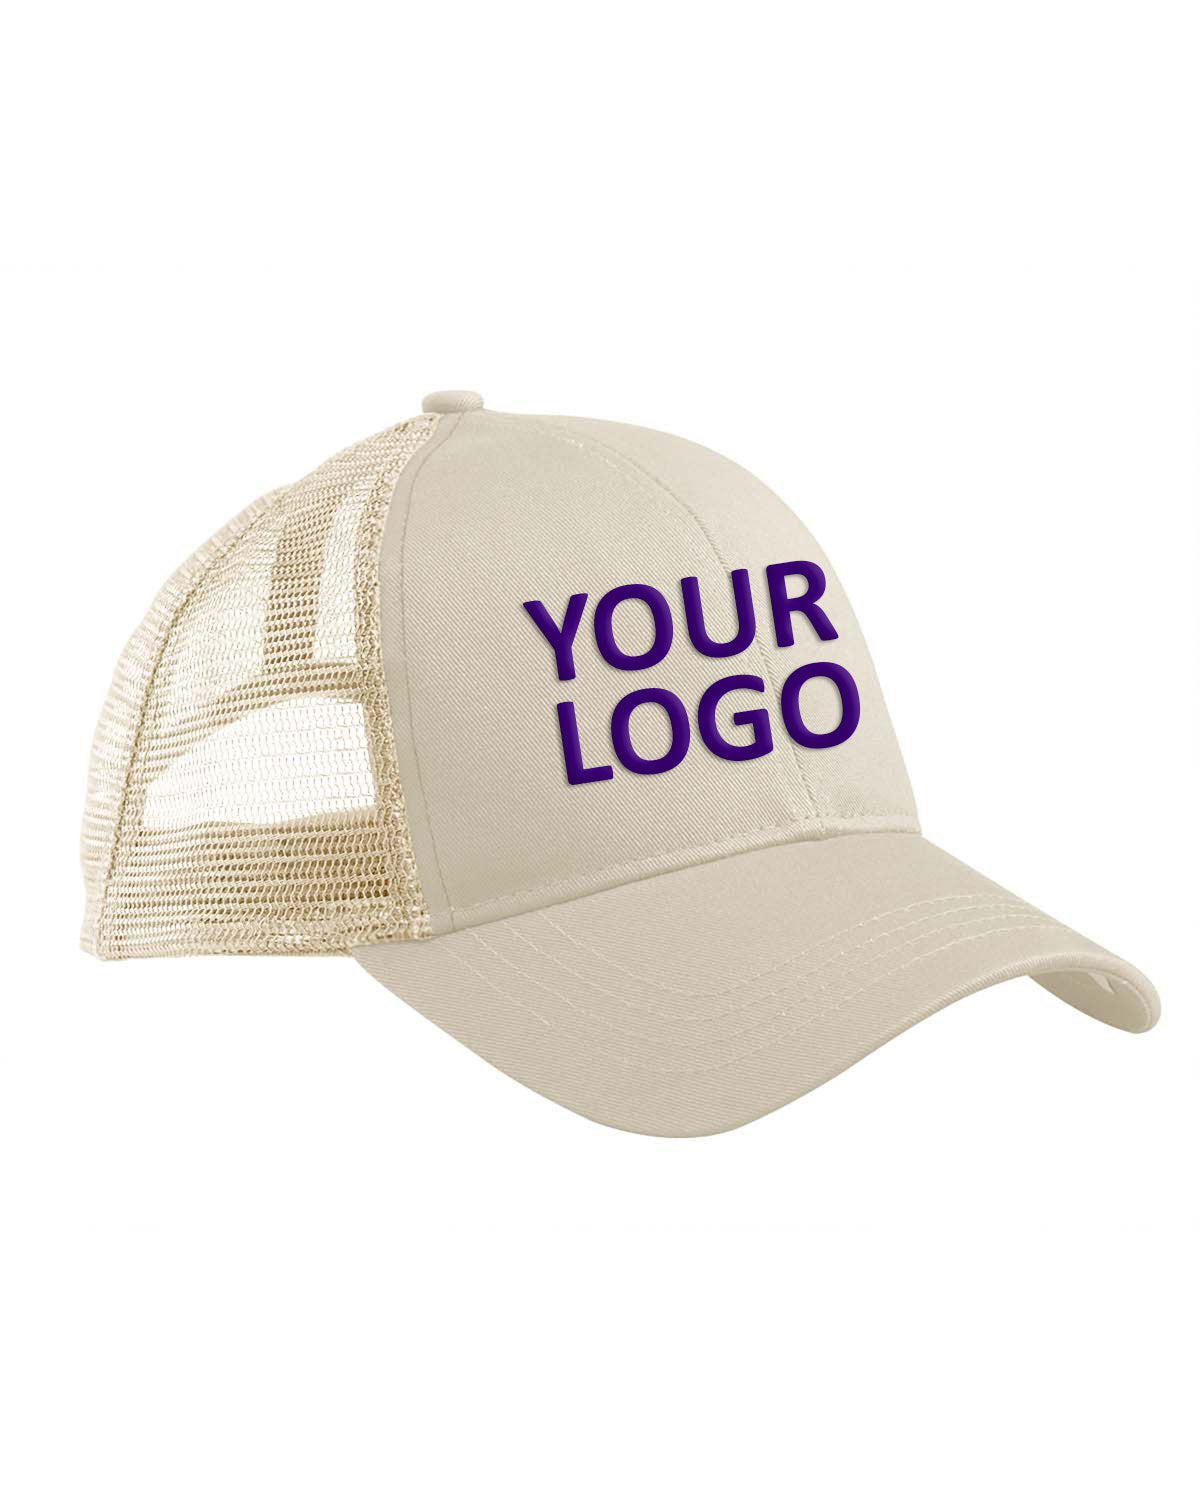 Econscious Eco Trucker Custom Hats, Oyster/ Oyster